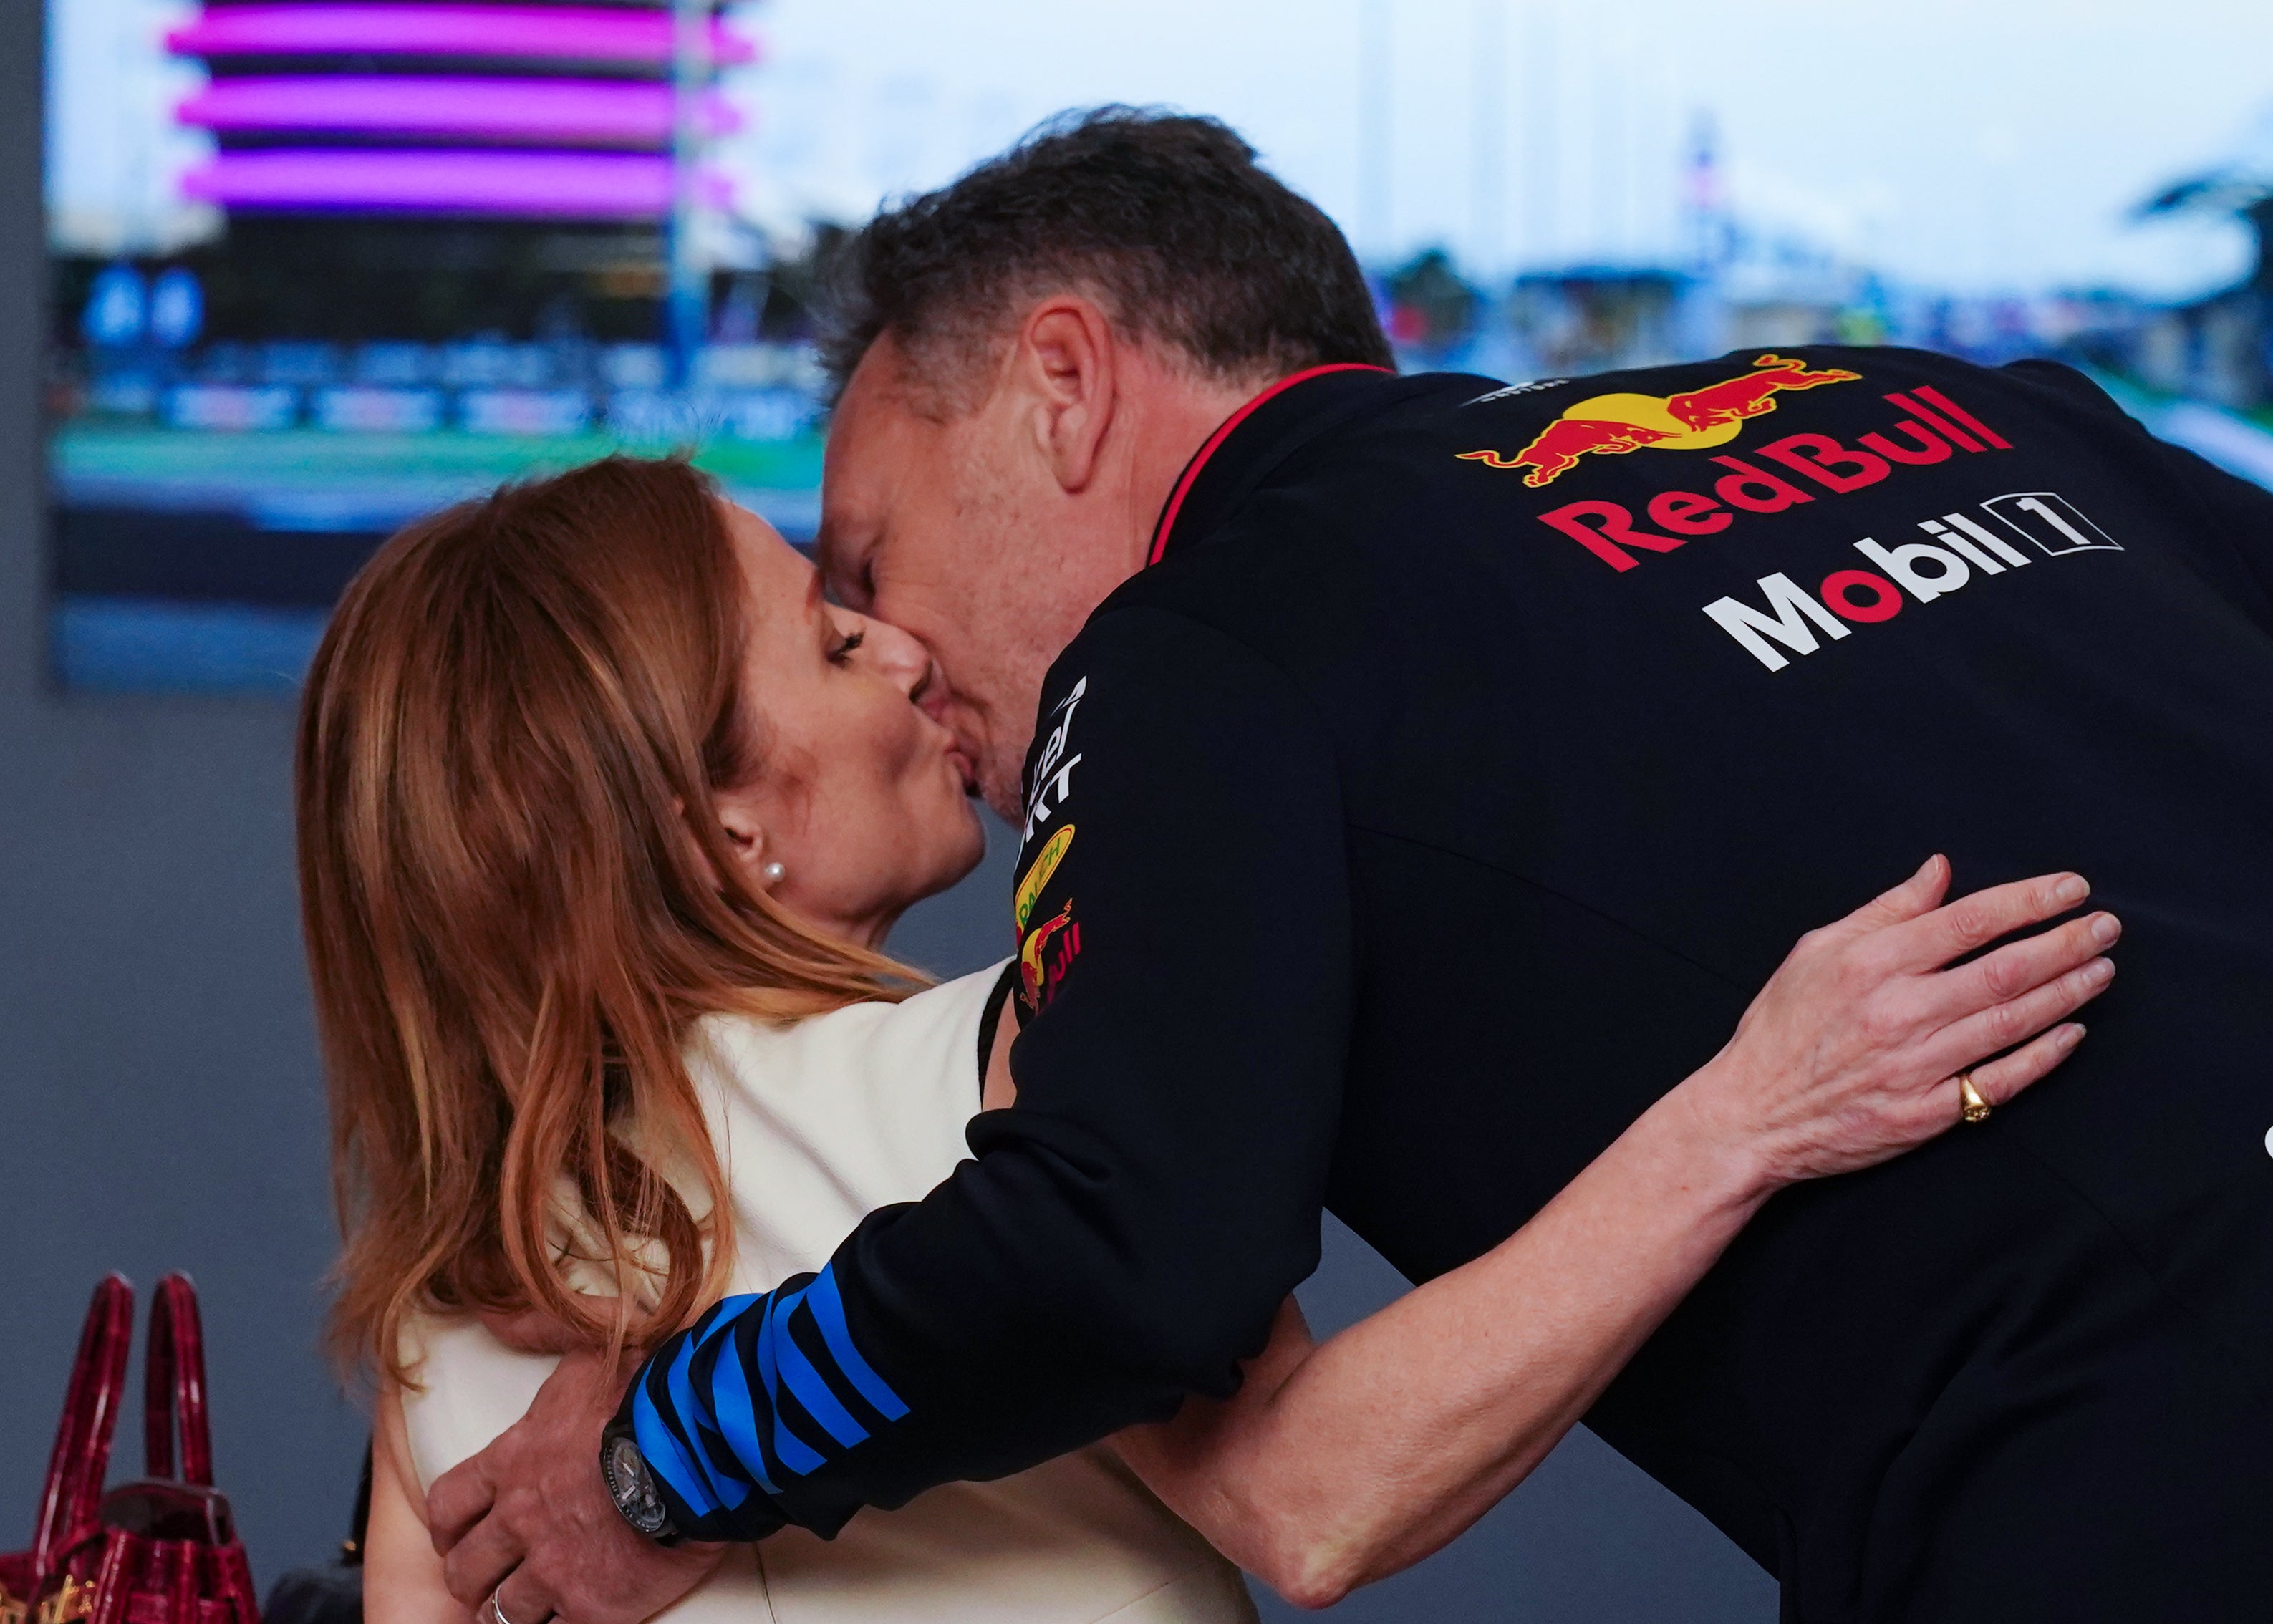 Christian and Geri Horner share a kiss before the Bahrain Grand Prix